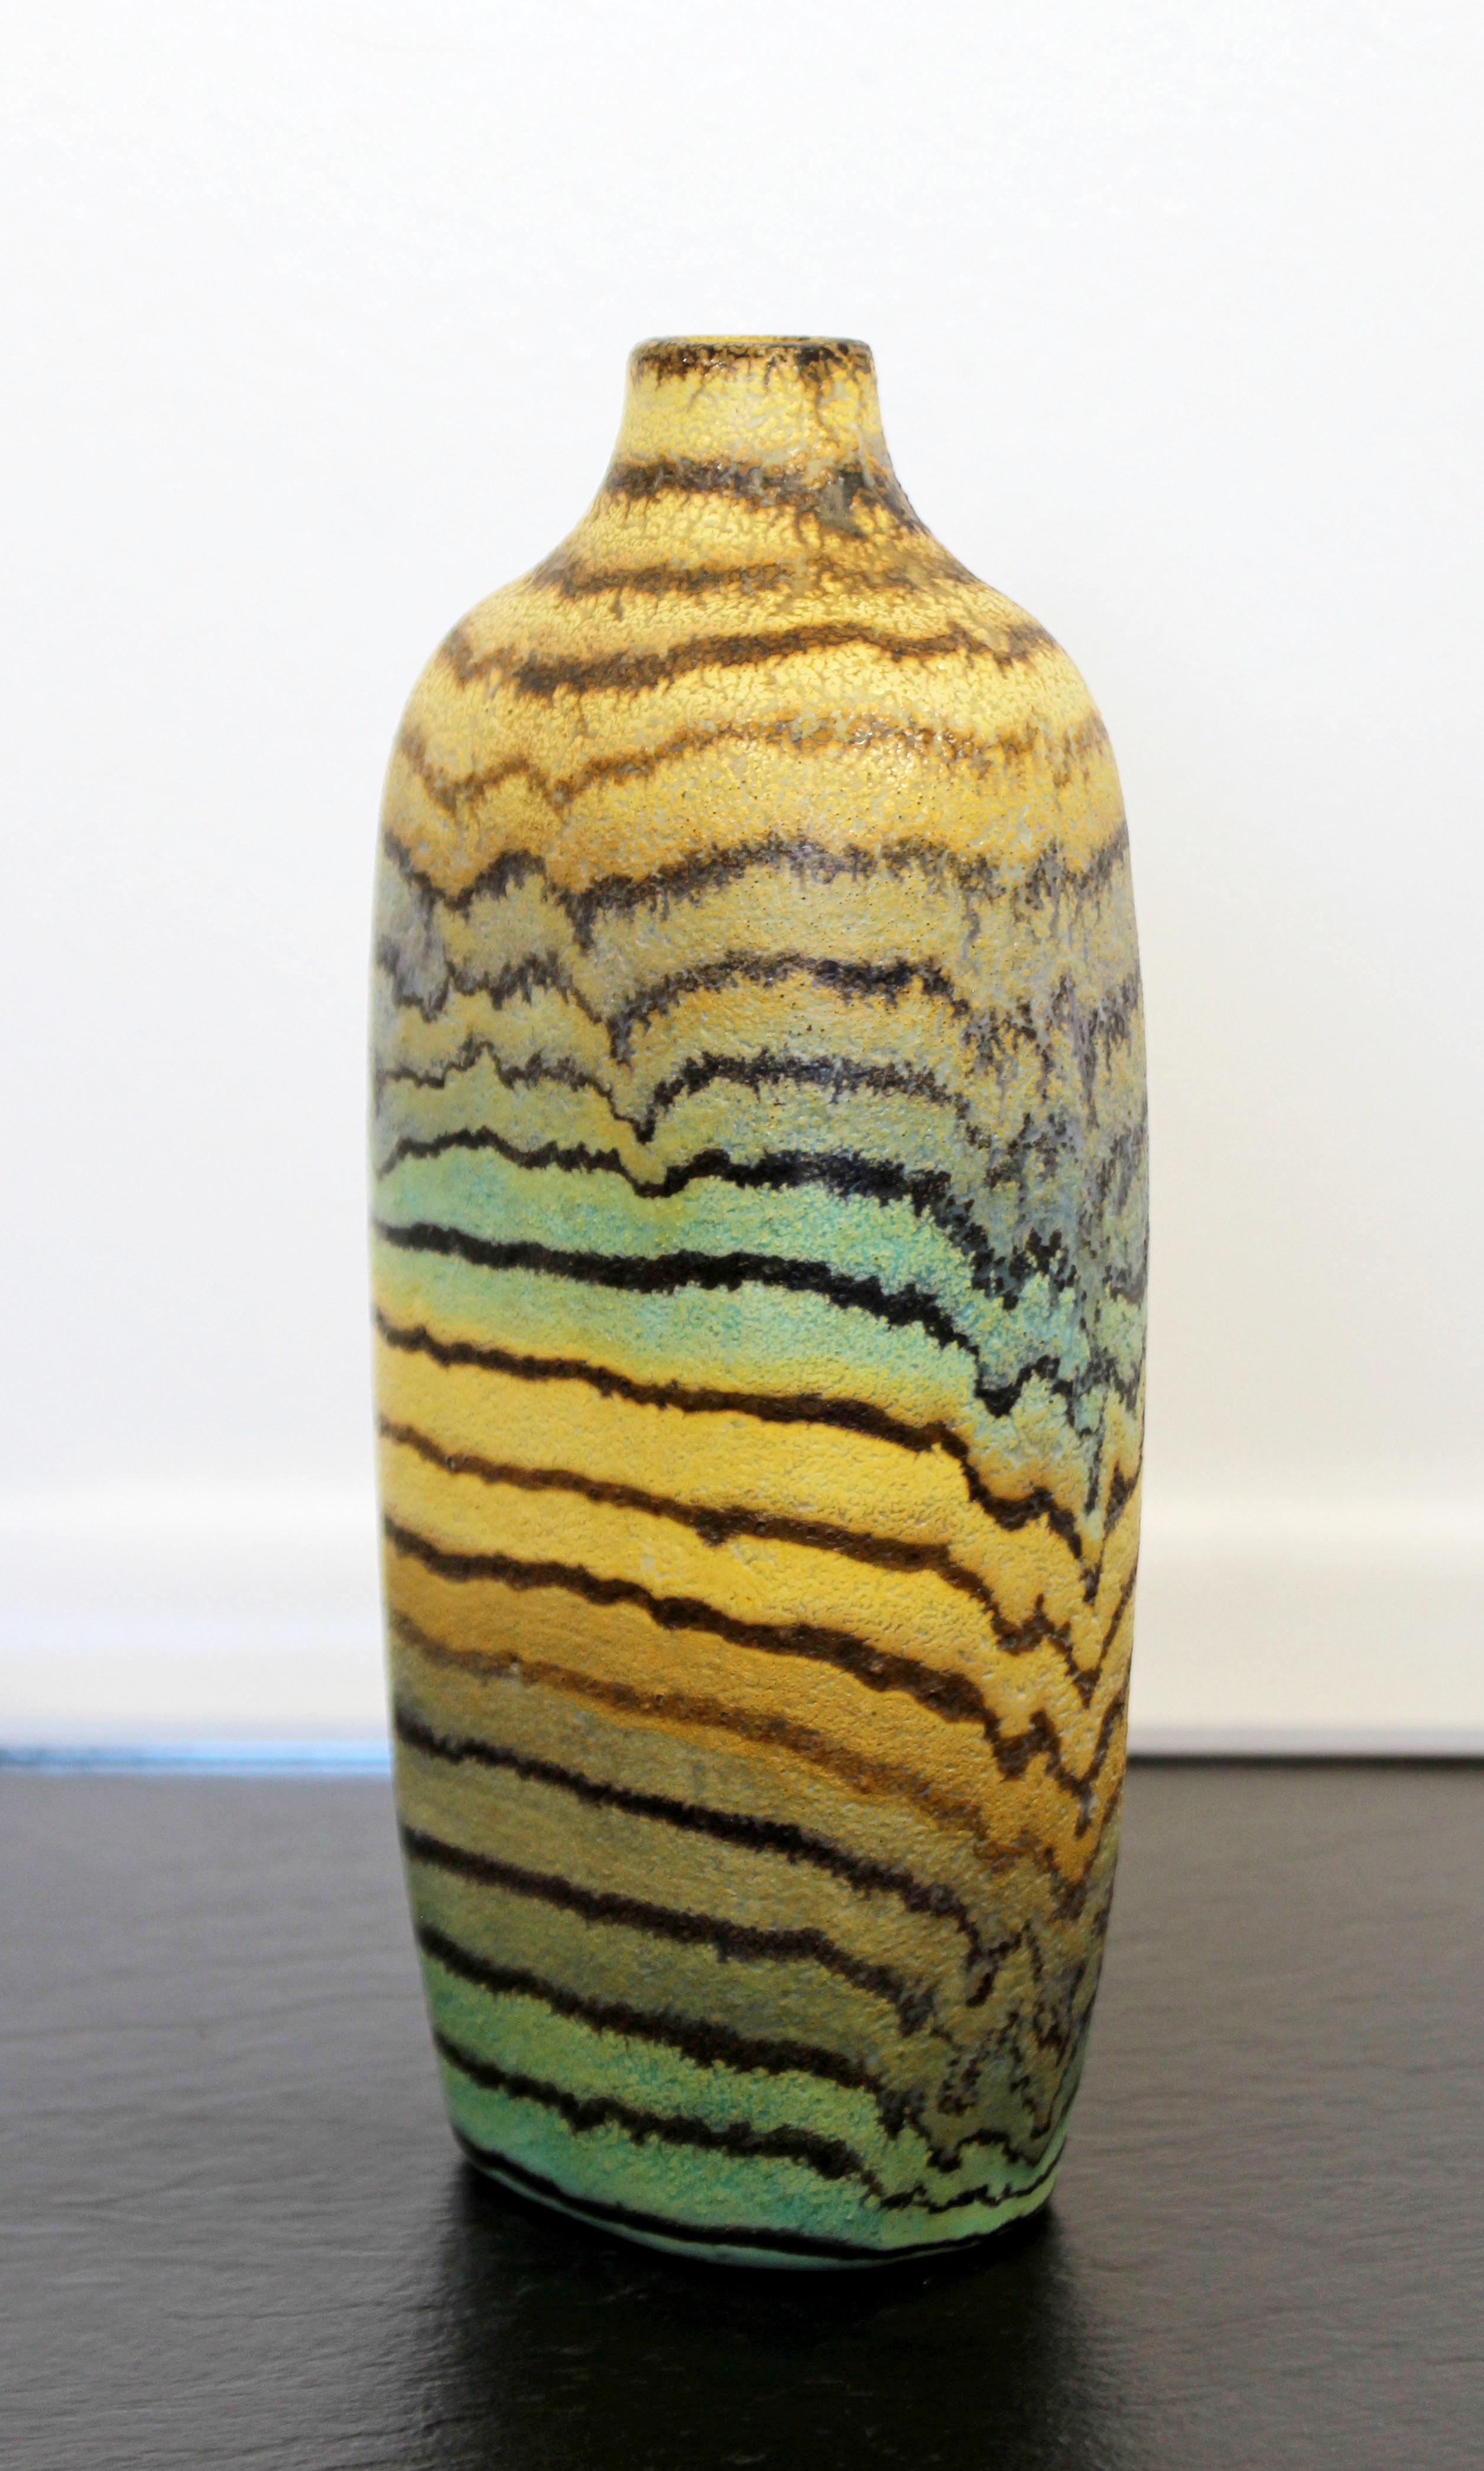 For your consideration is a magnificent and rare, ceramic art vase or vessel, signed on the bottom by Marcello Fantoni for Raymor, made in Italy in the 1950s. In excellent condition. The dimensions are 4